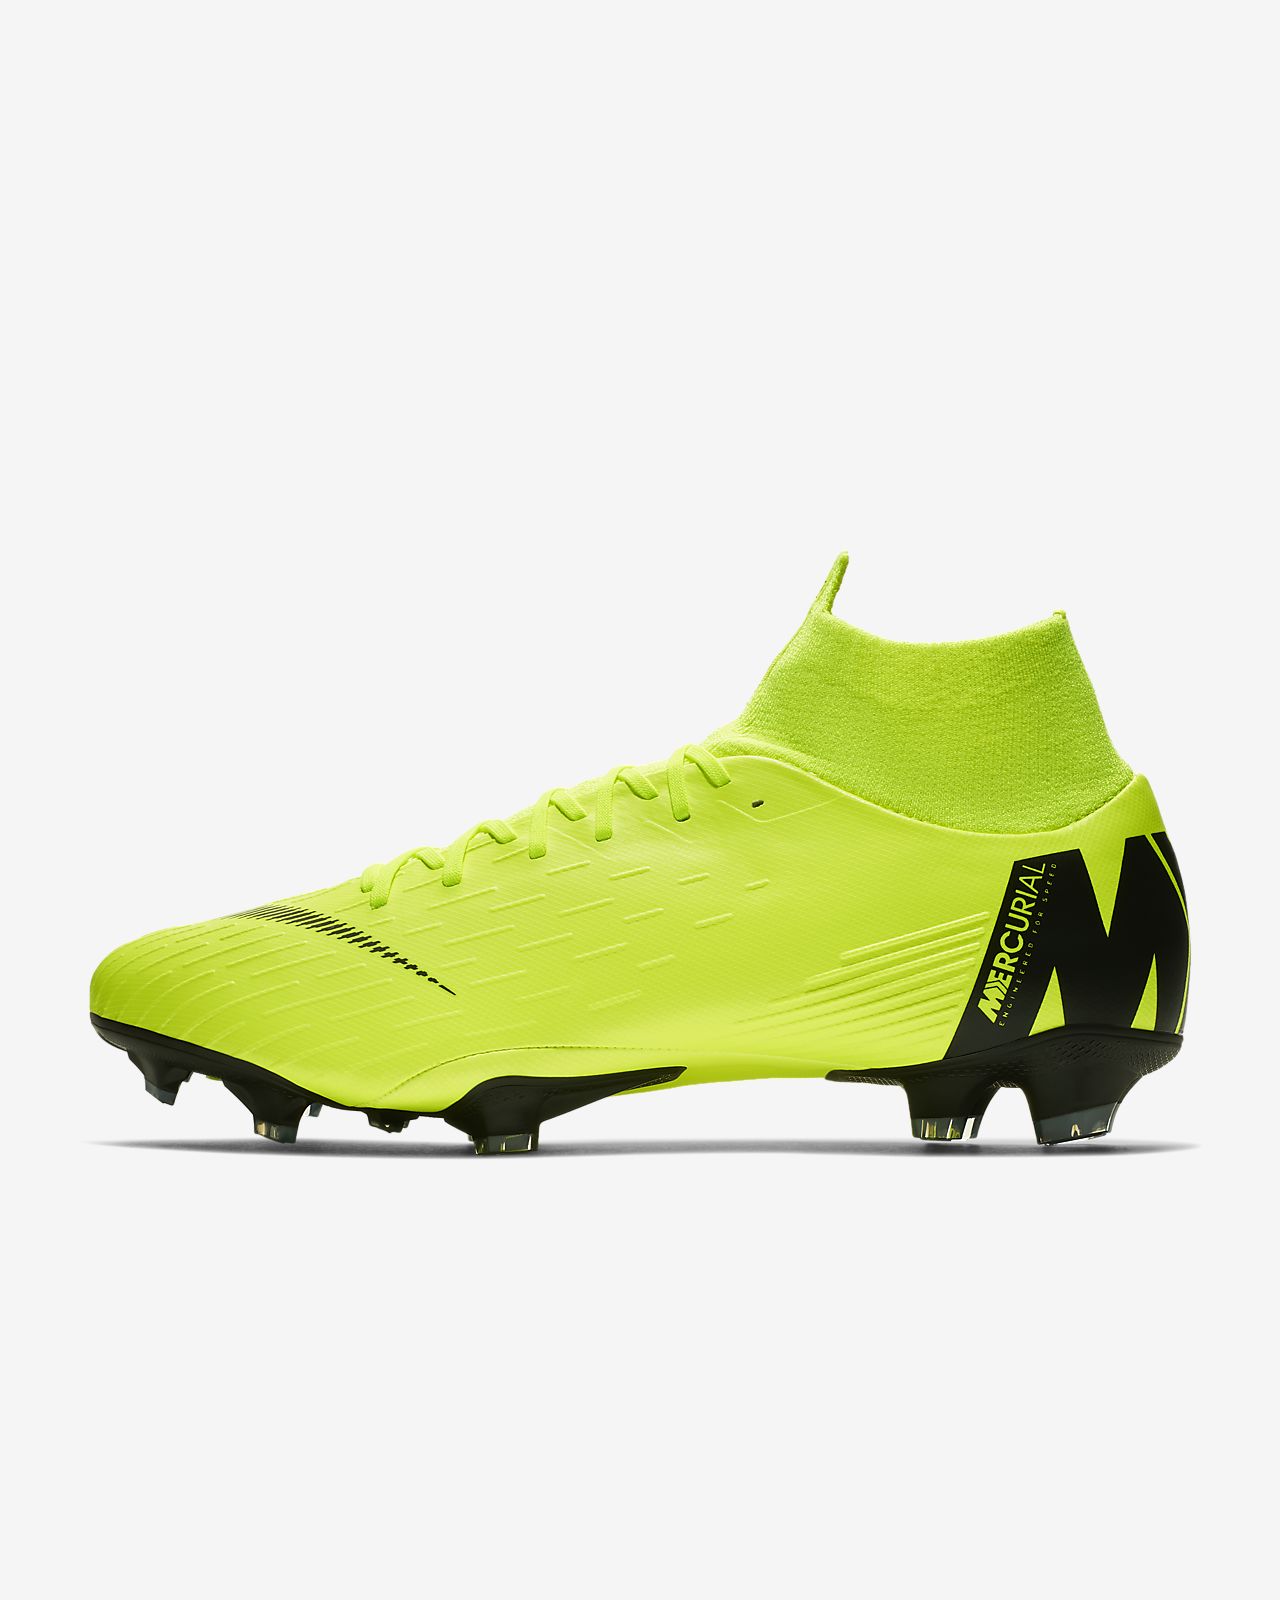 Superfly 6 Pro FG Mens in Black Gold by Nike WSS